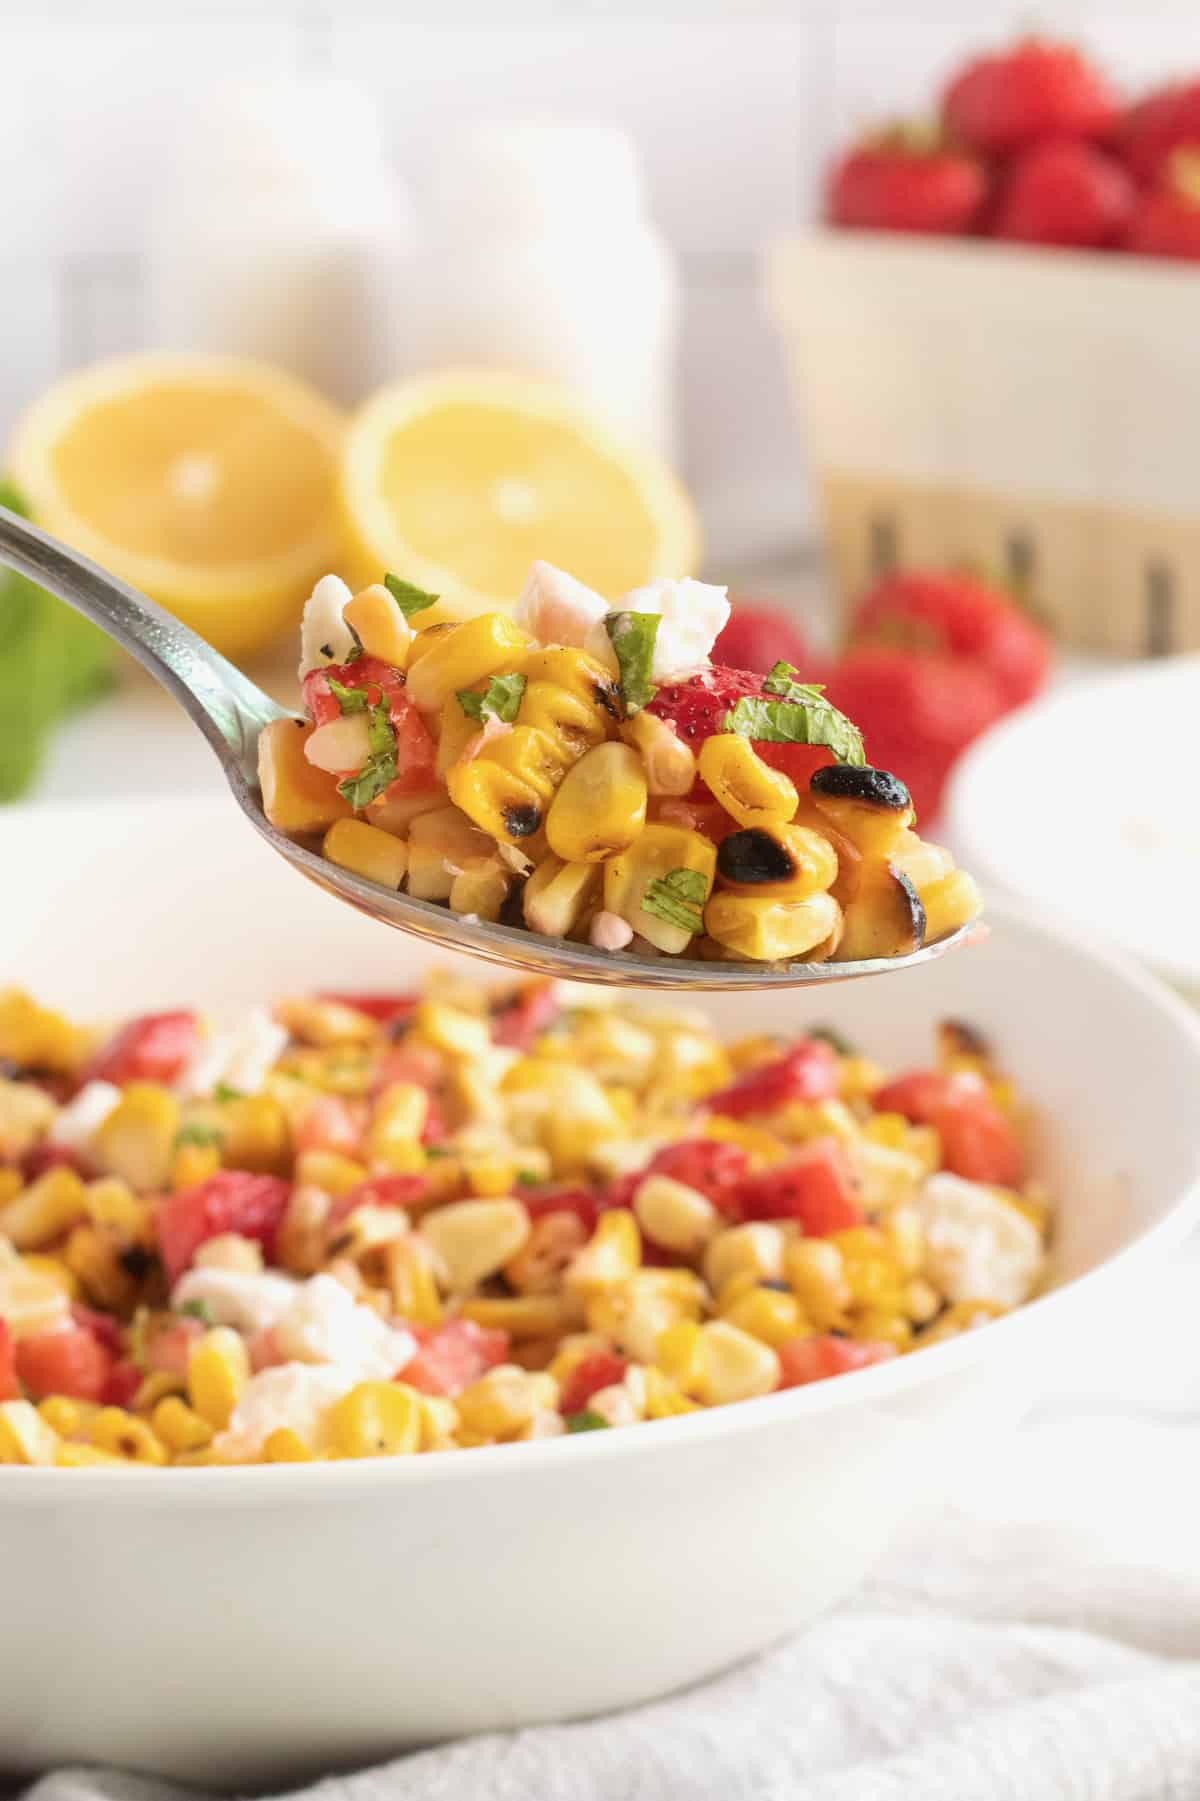 Grilled Corn Salad with Strawberries, Feta and Mint by The BakerMama